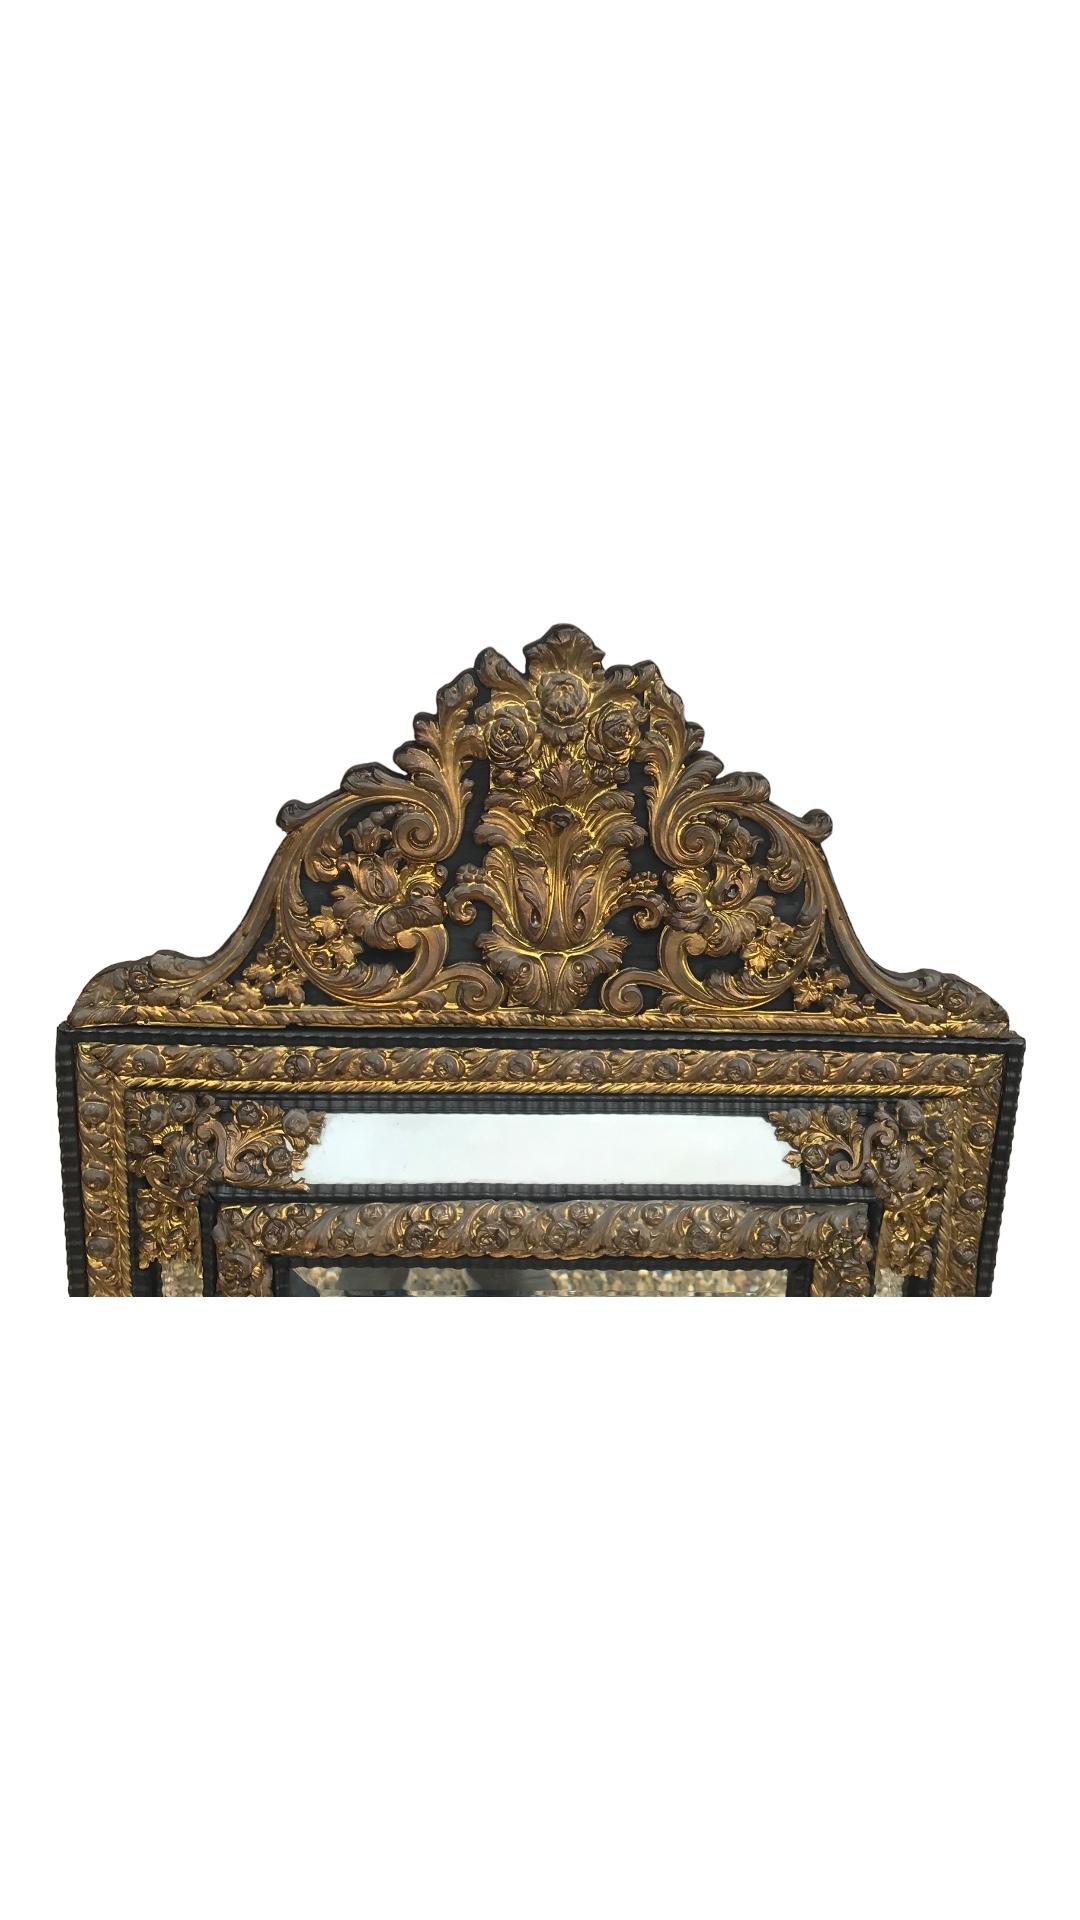 This beautiful unique Baroque mirror was made in the 18th-19th century in Belgium. The frame features a hammered brass decor with flower and acanthus leave motifs. The mirror glass is original. The wall mirror is in good original condition. It is a